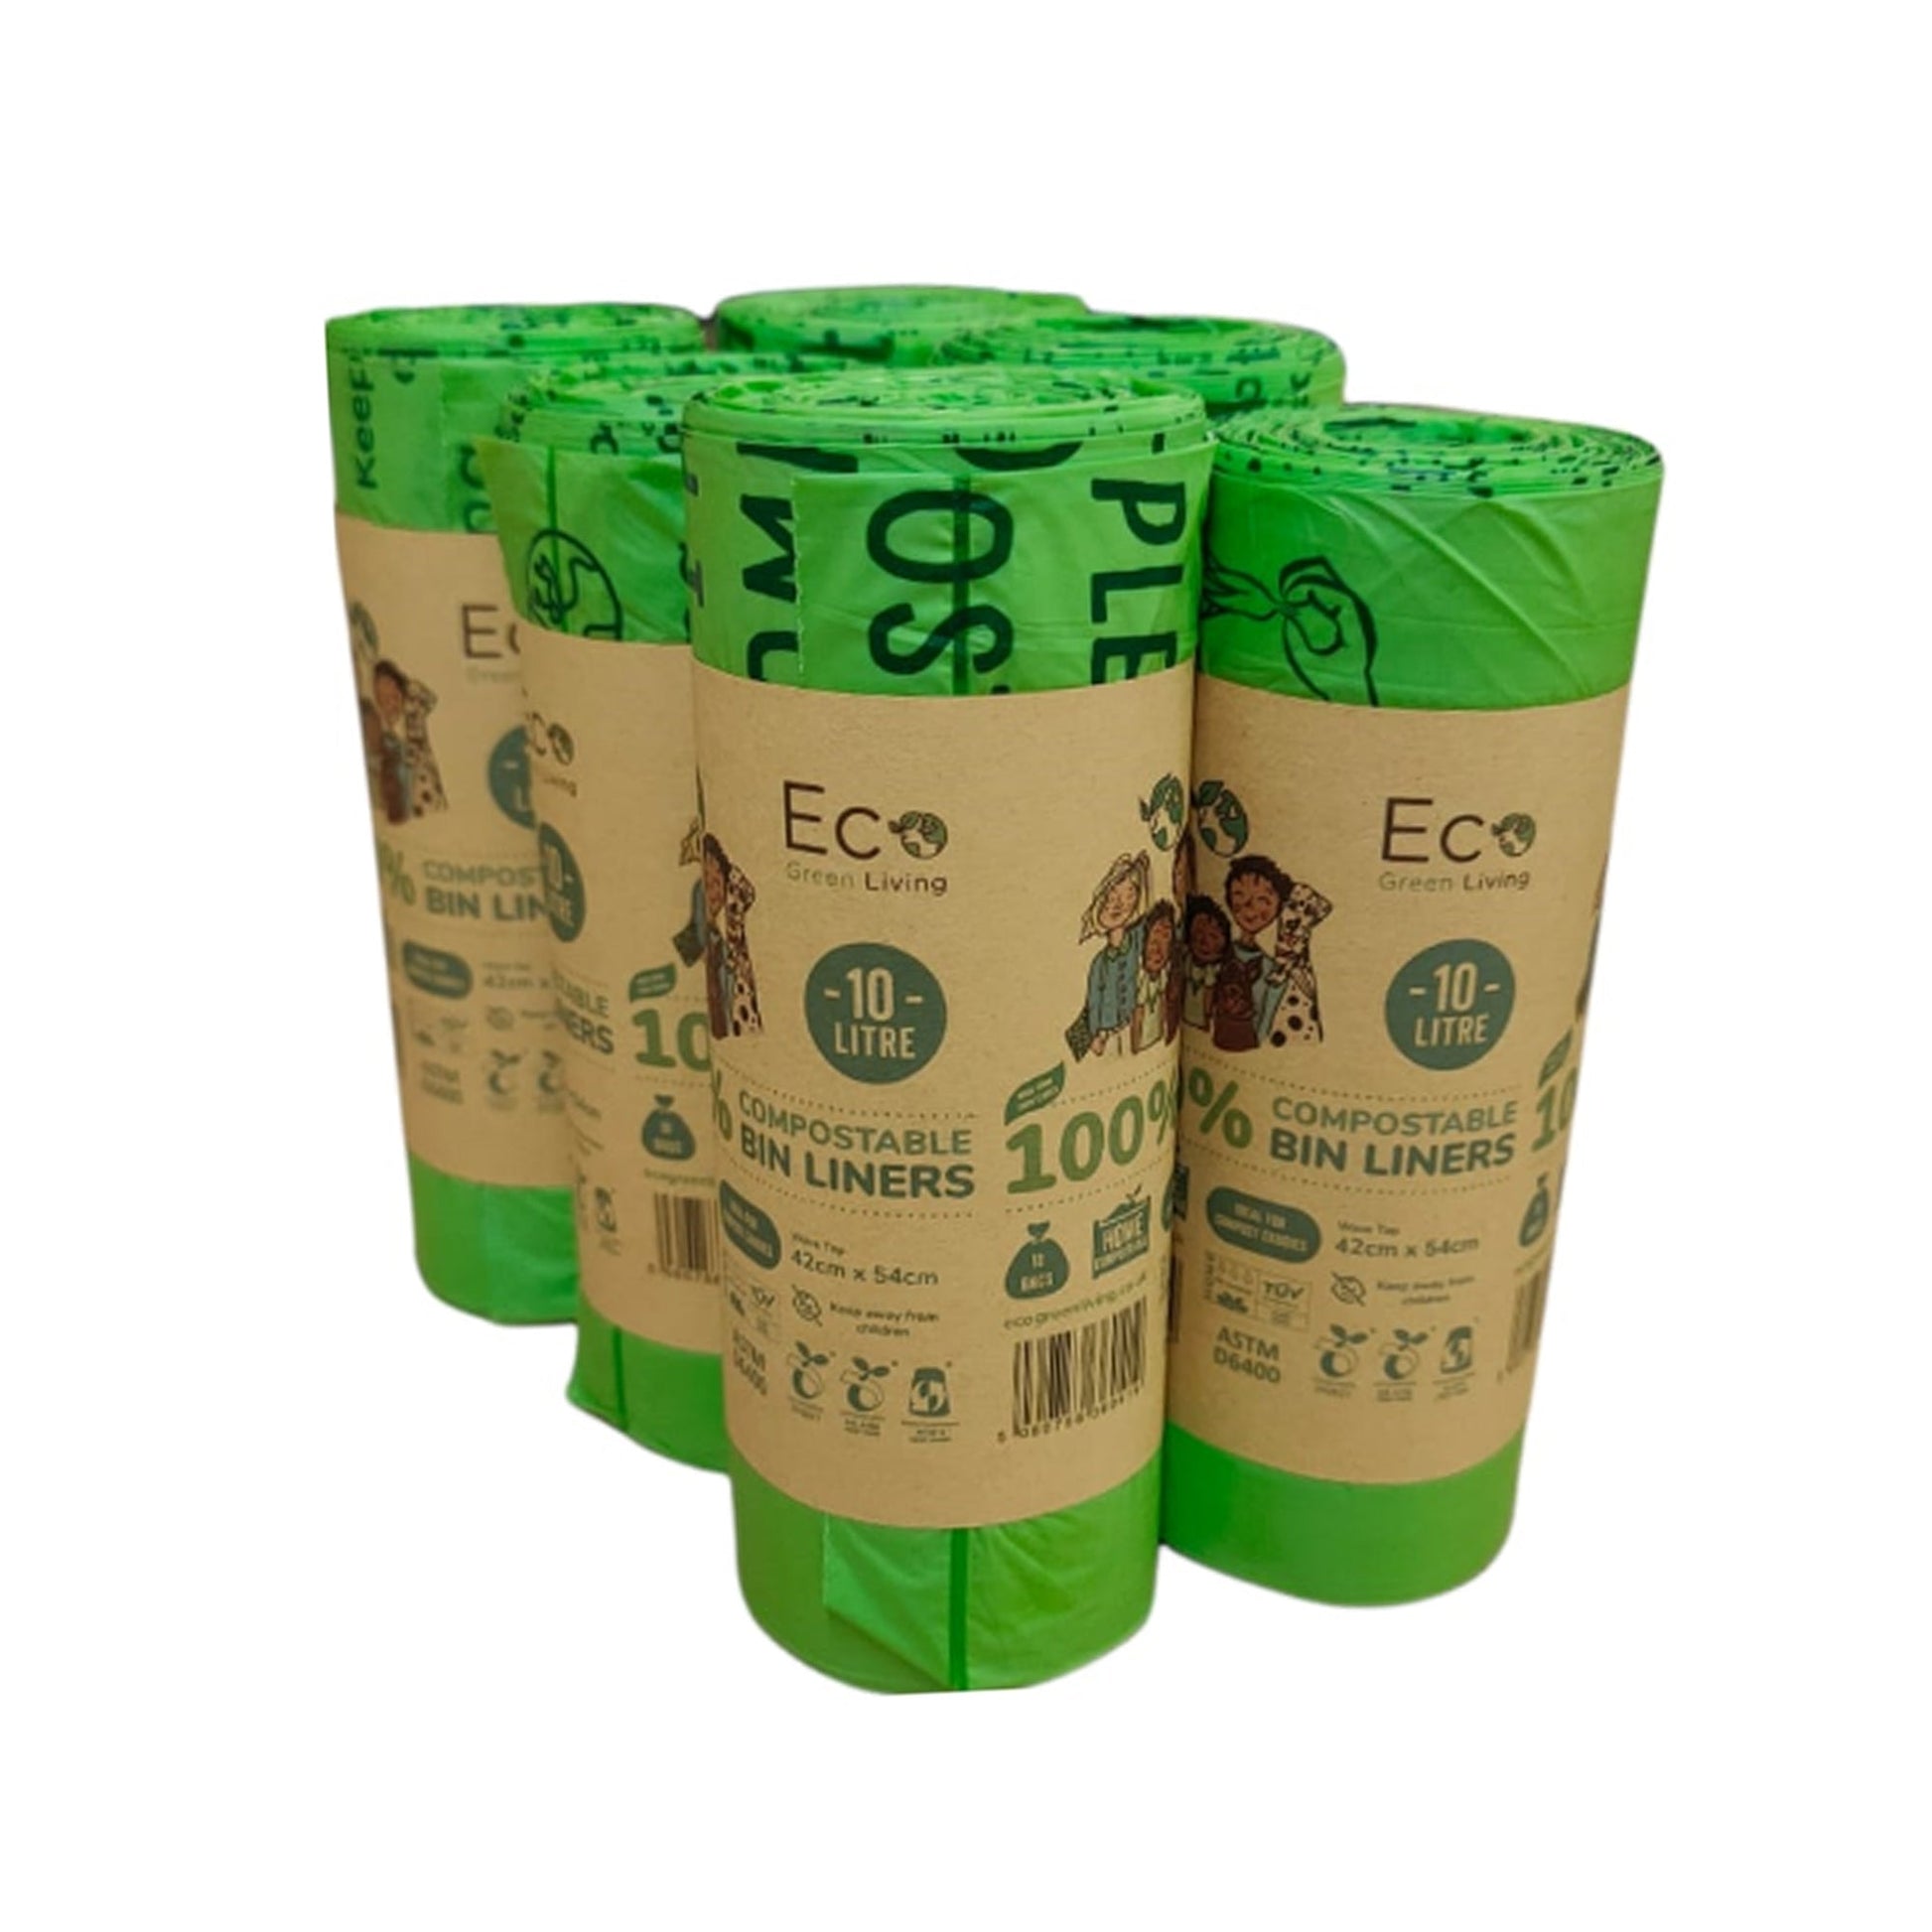 10L Compostable Waste Bags | 6 Rolls of 18 Bags | Eco Green Living - EcoGreenLiving